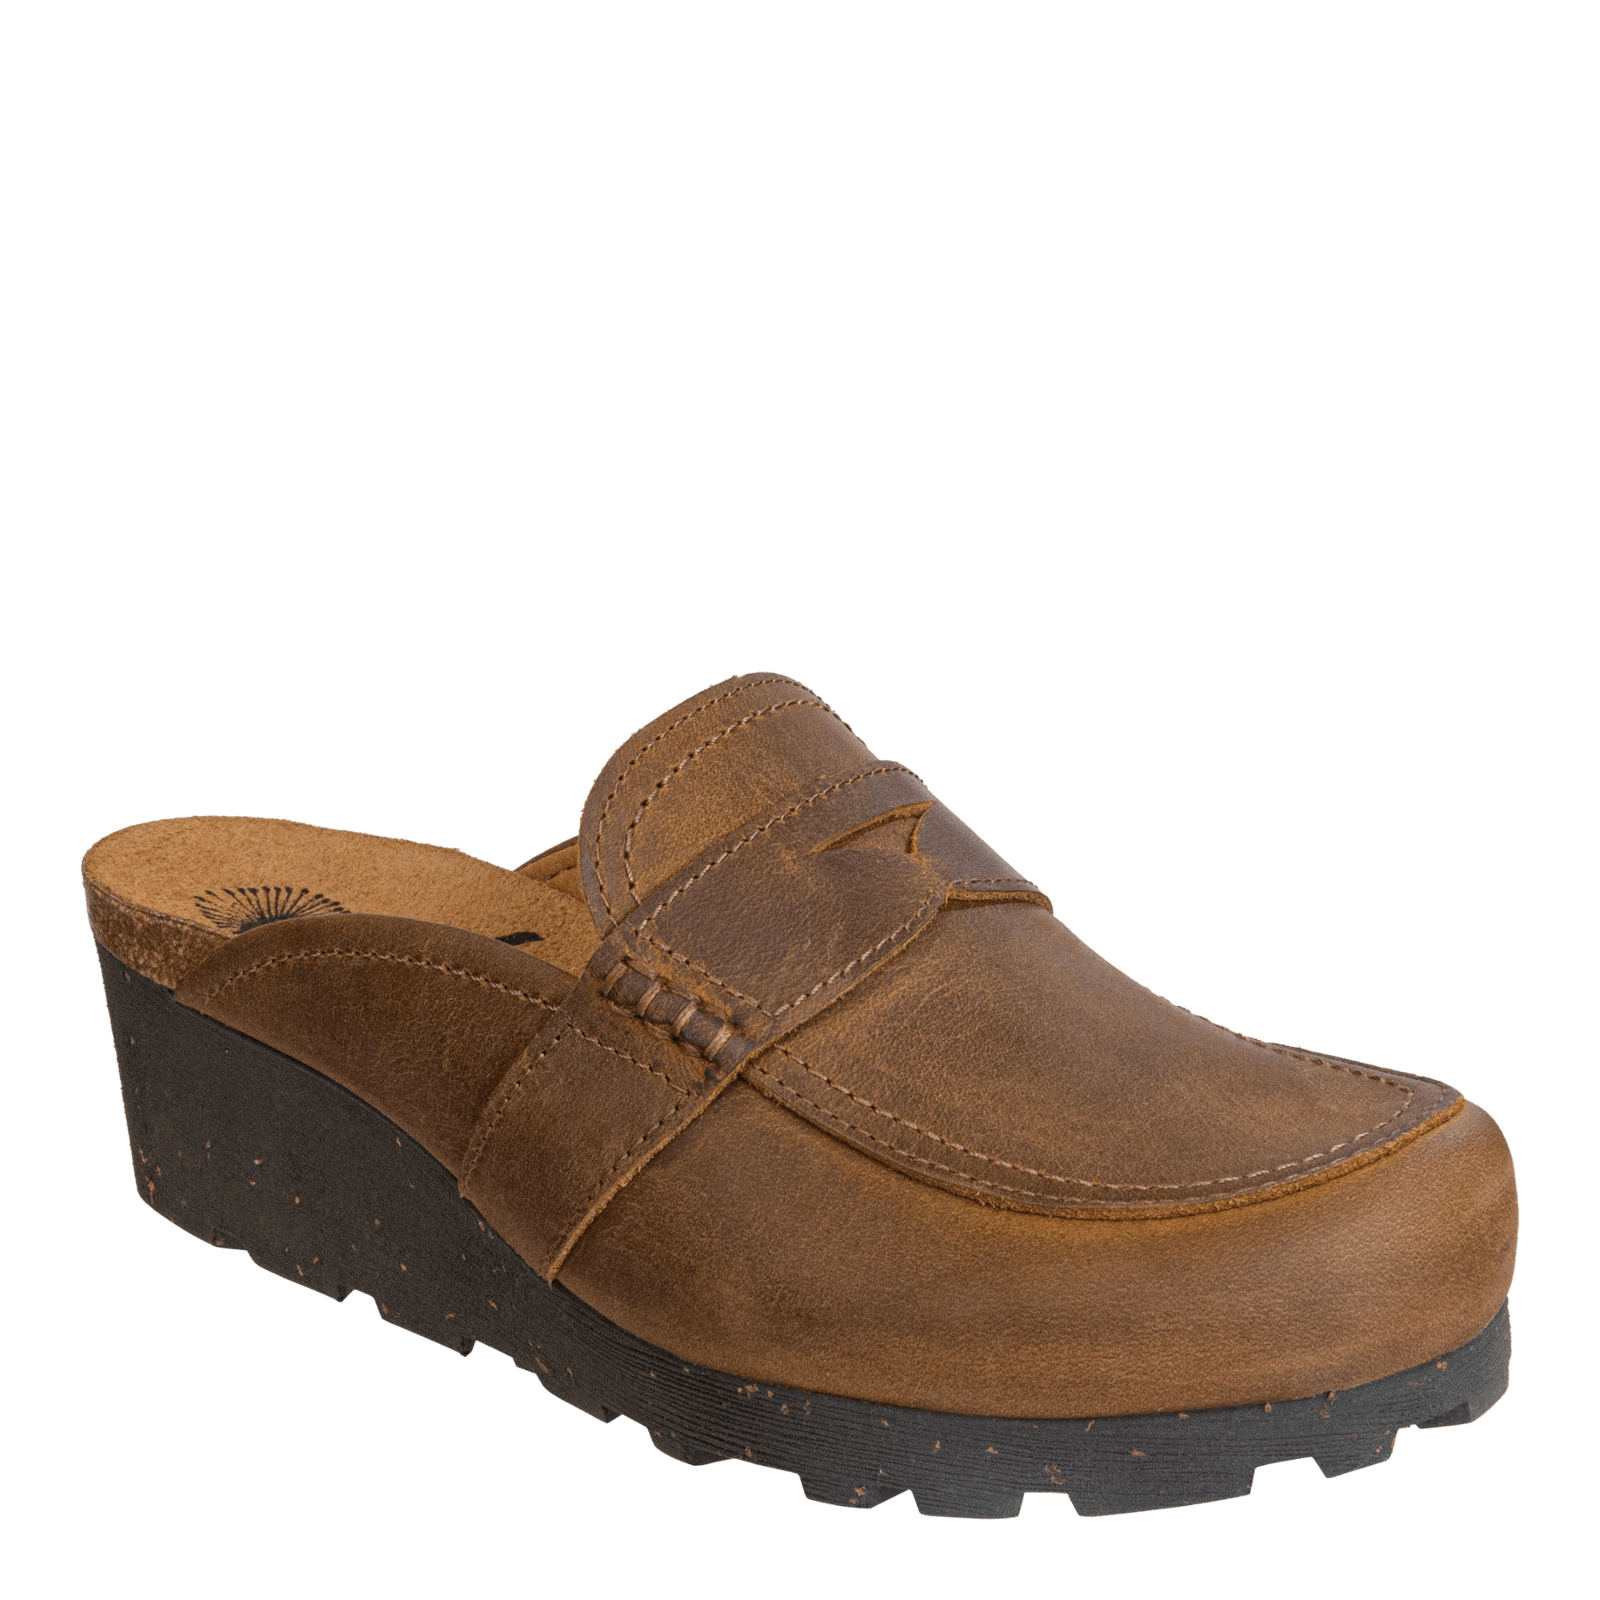 HOMAGE in RUST Wedge Clogs - OTBT shoes